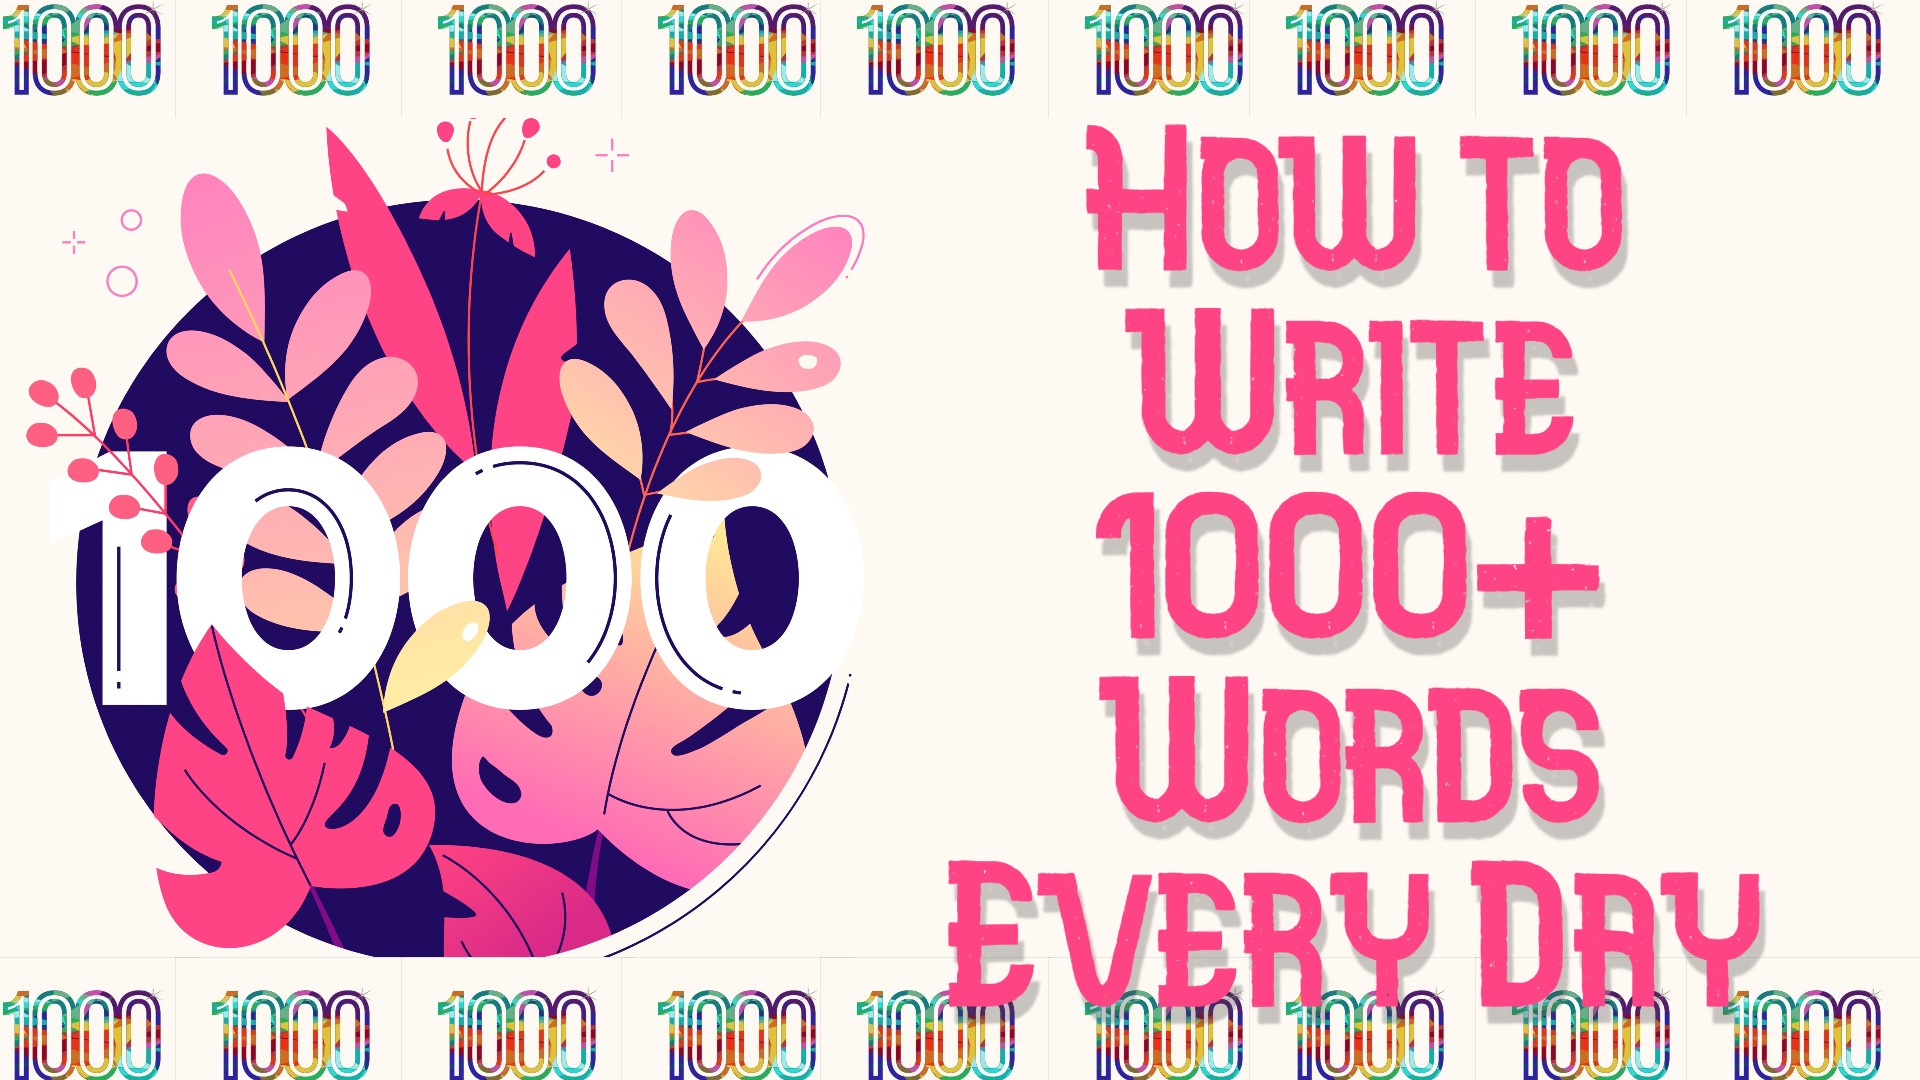 How to Write 1000+ Words Every Day